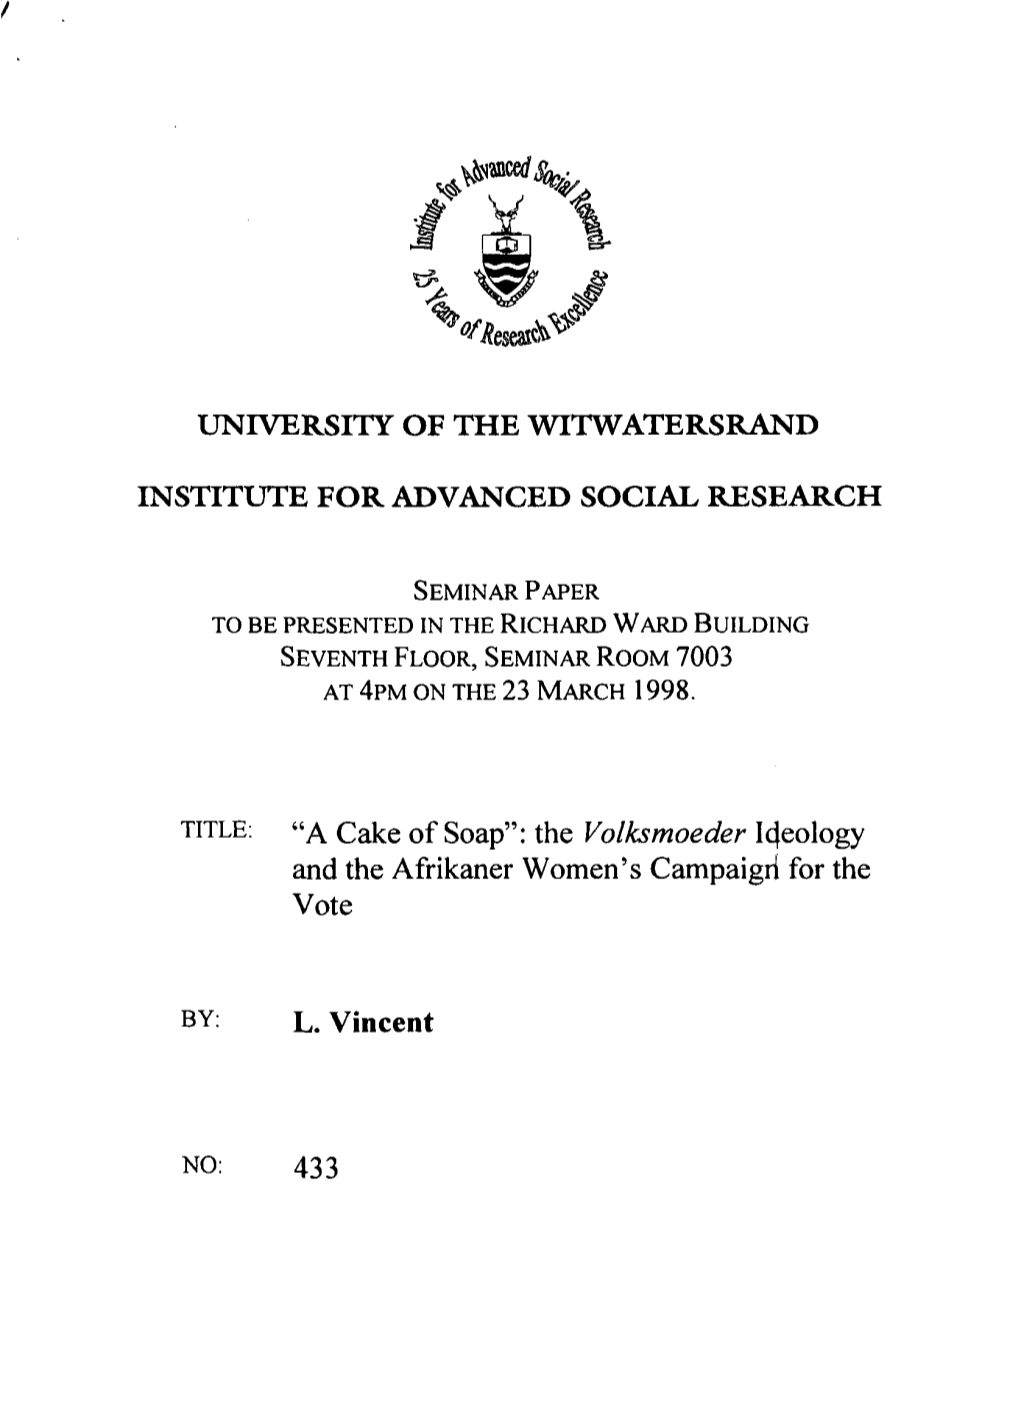 The Volksmoeder Ideology and Afrikaner Women's Campaign for the Vote Louise Vincent, Rhodes University March 1998